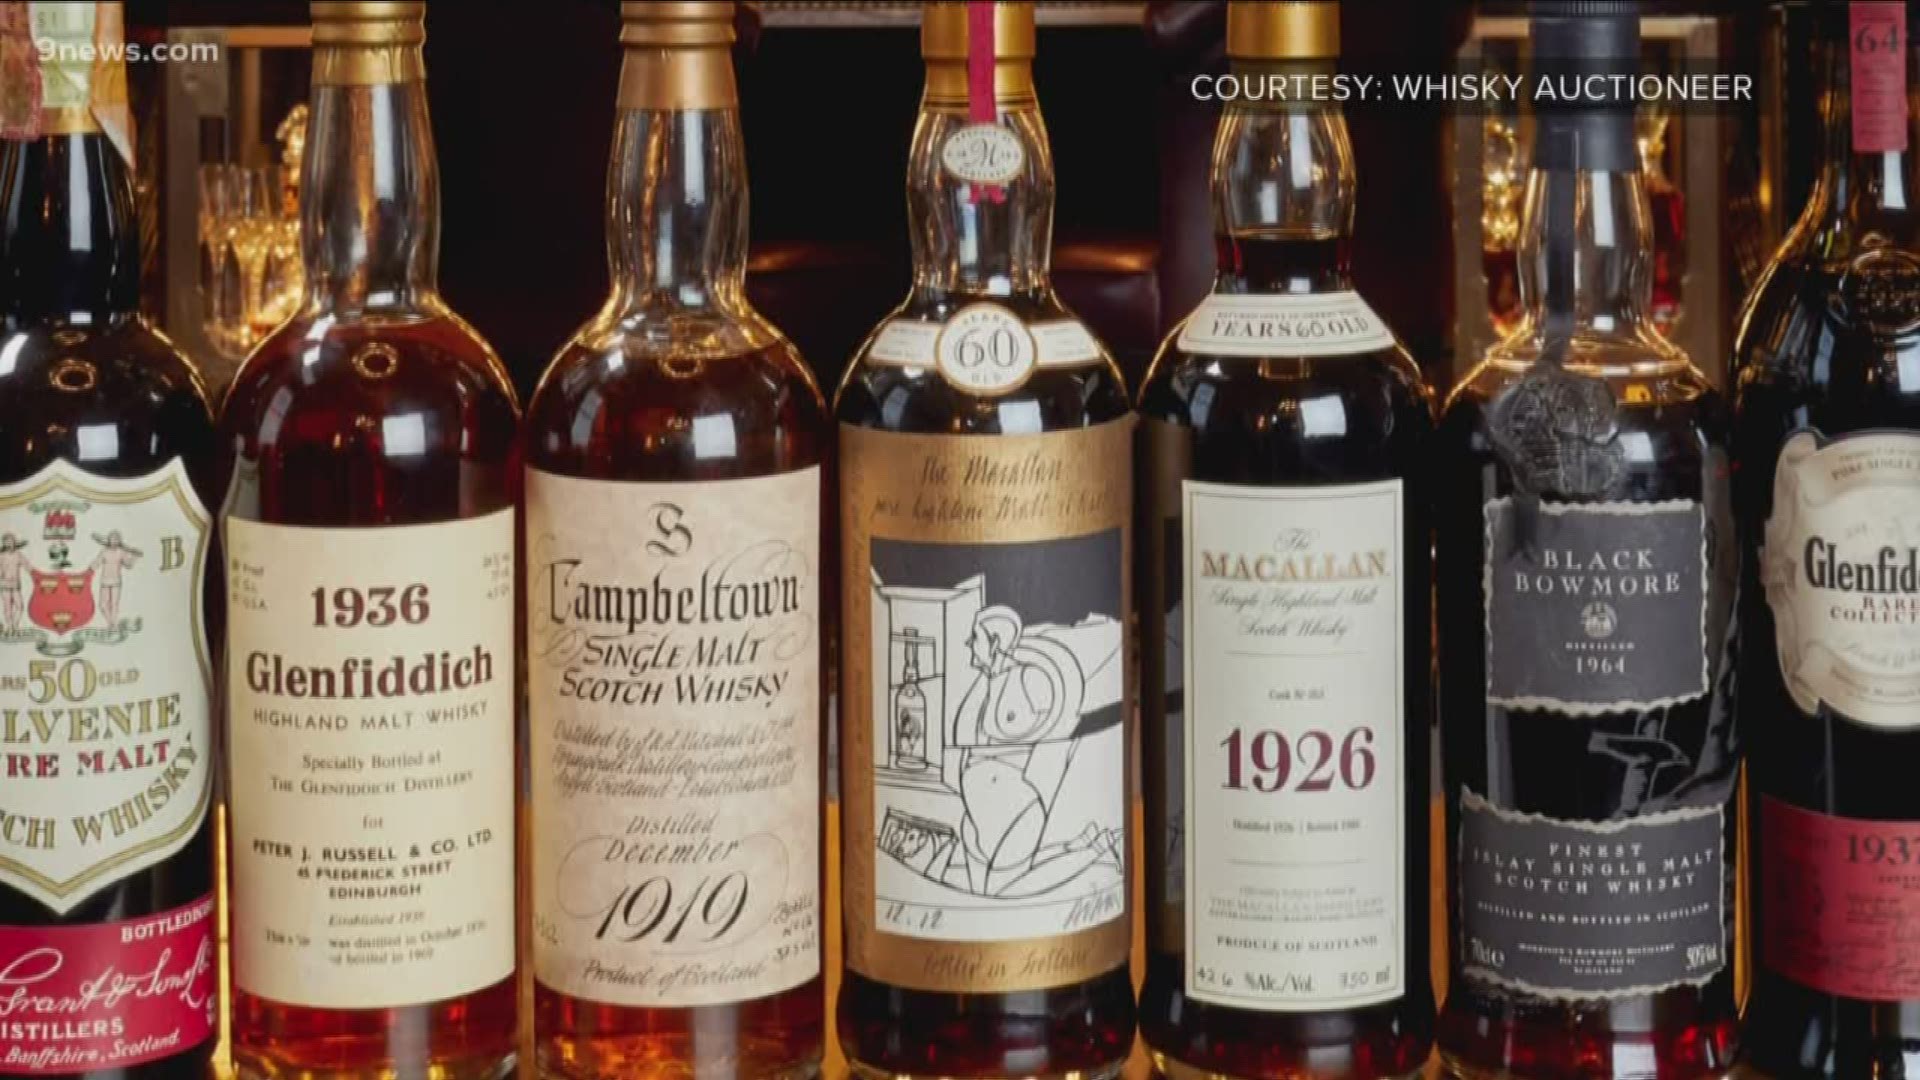 The collection of more than 3,900 bottles is the most significant ever to go on public sale. It will be auctioned off next year.